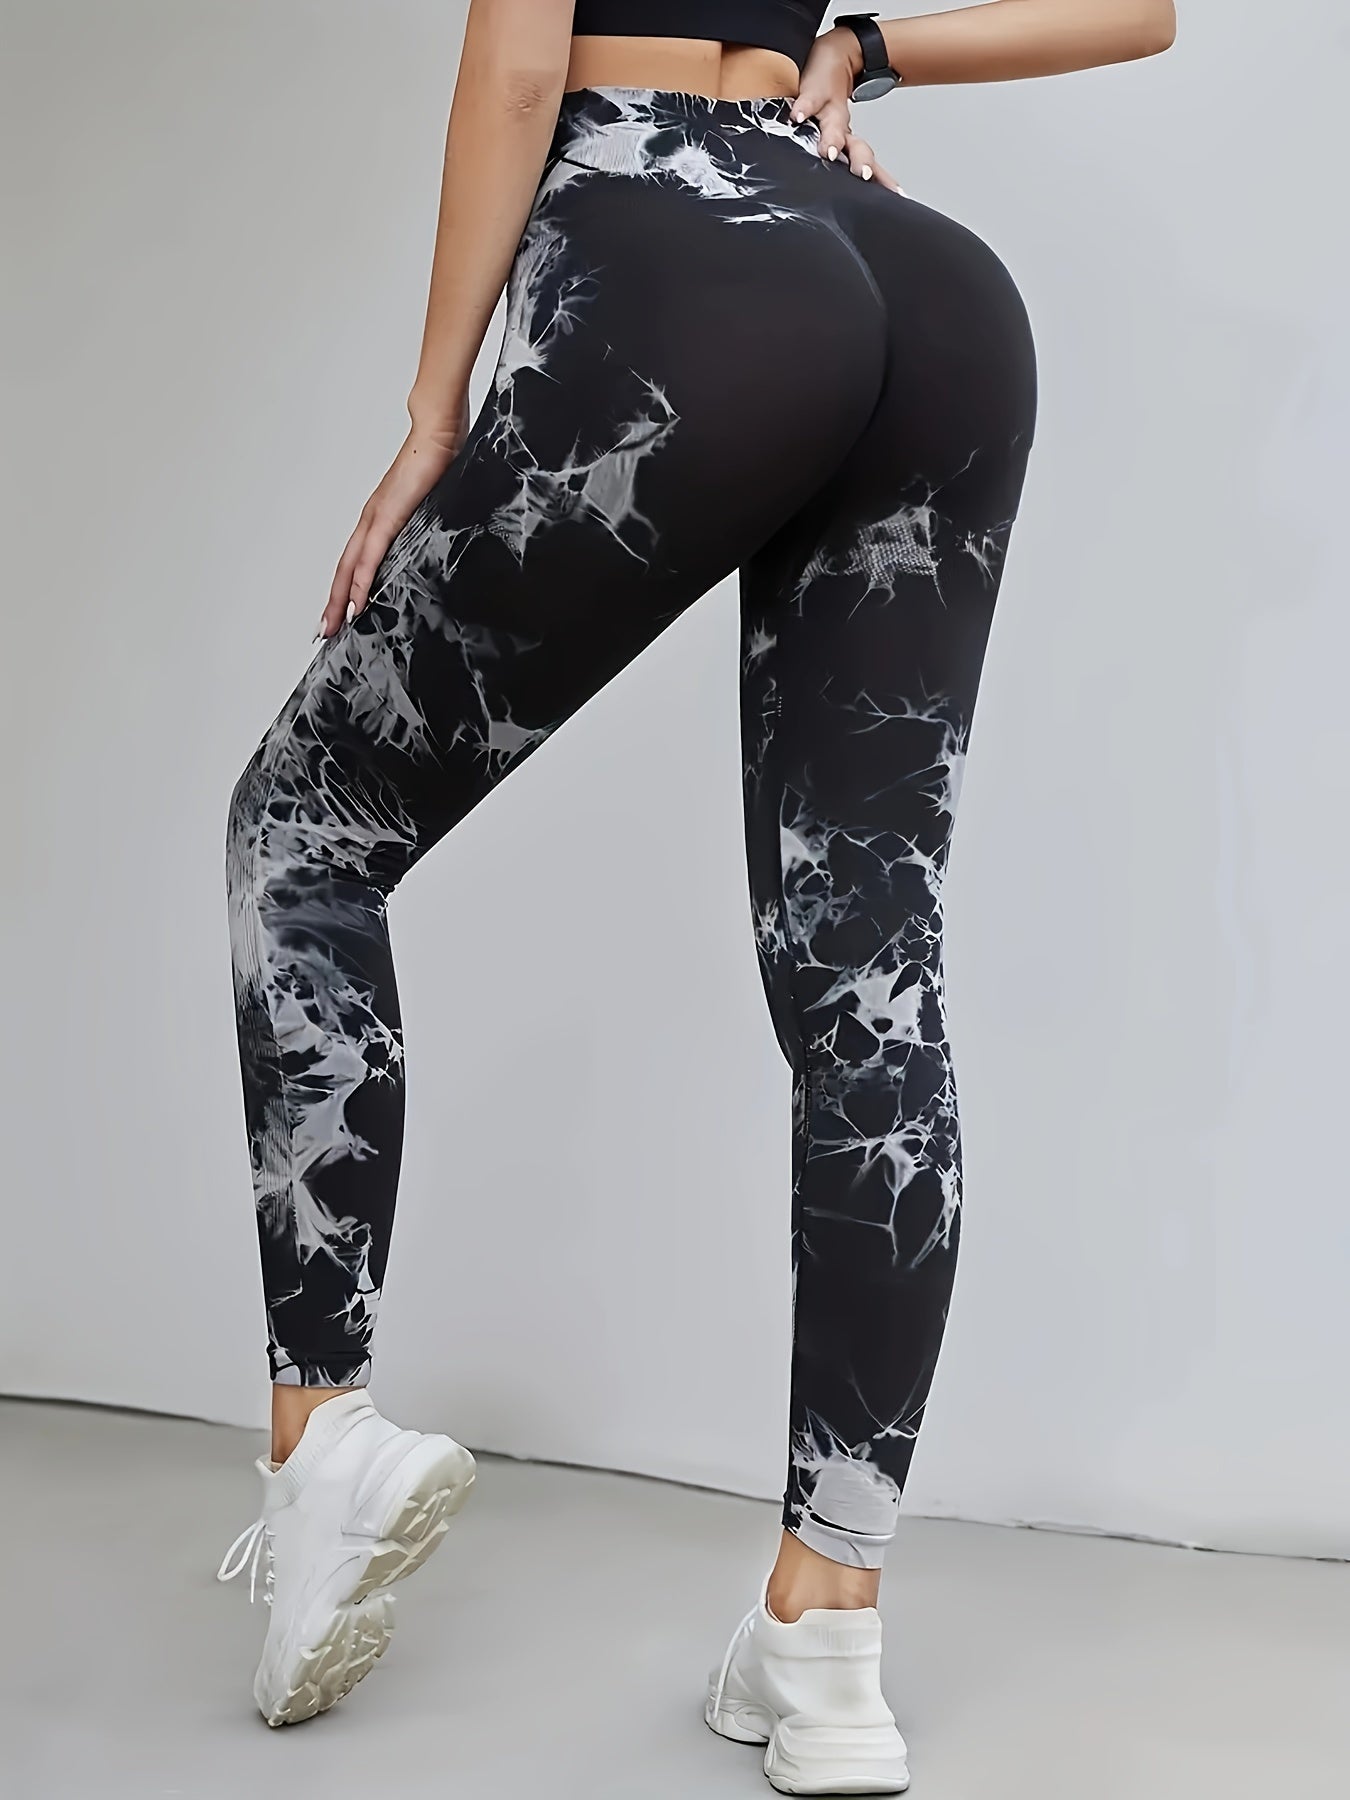 xieyinshe  Tie Dye High Waist Yoga Seamless Sports Leggings, Running Training Exercise Tight Stretch Fitness Pants, Women's Activewear